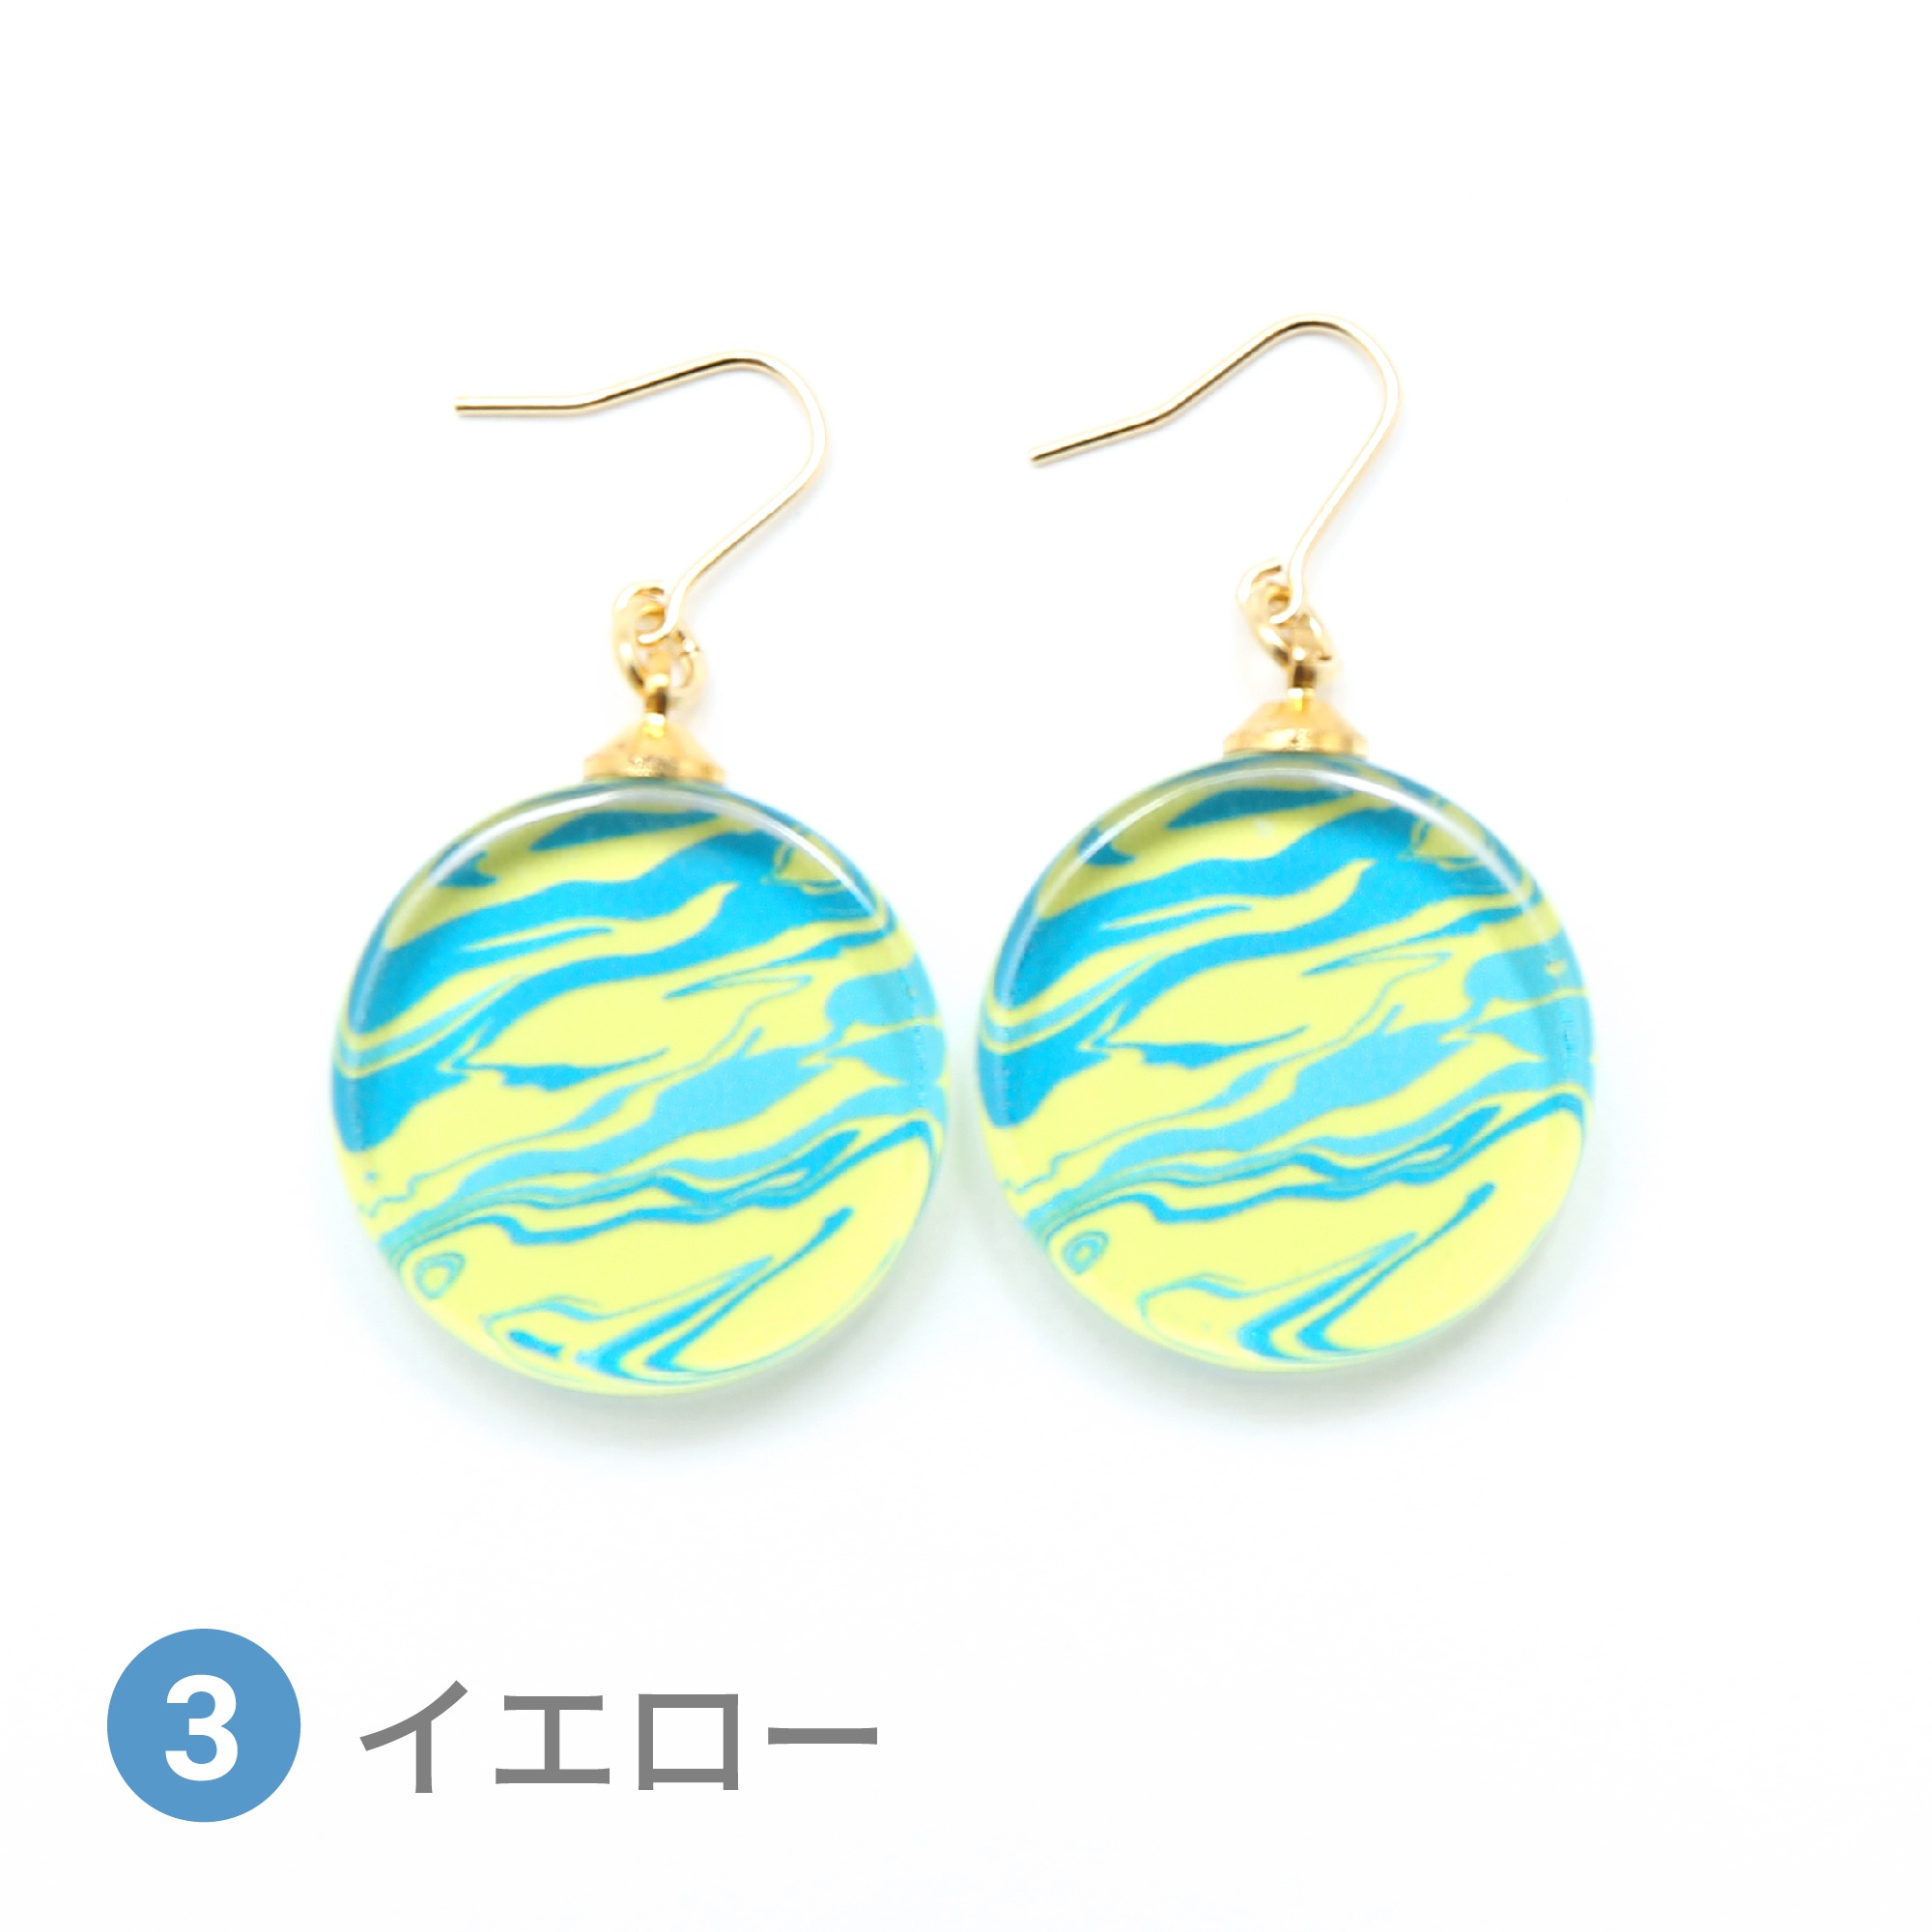 Glass accessories Pierced Earring MARBLE yellow round shape